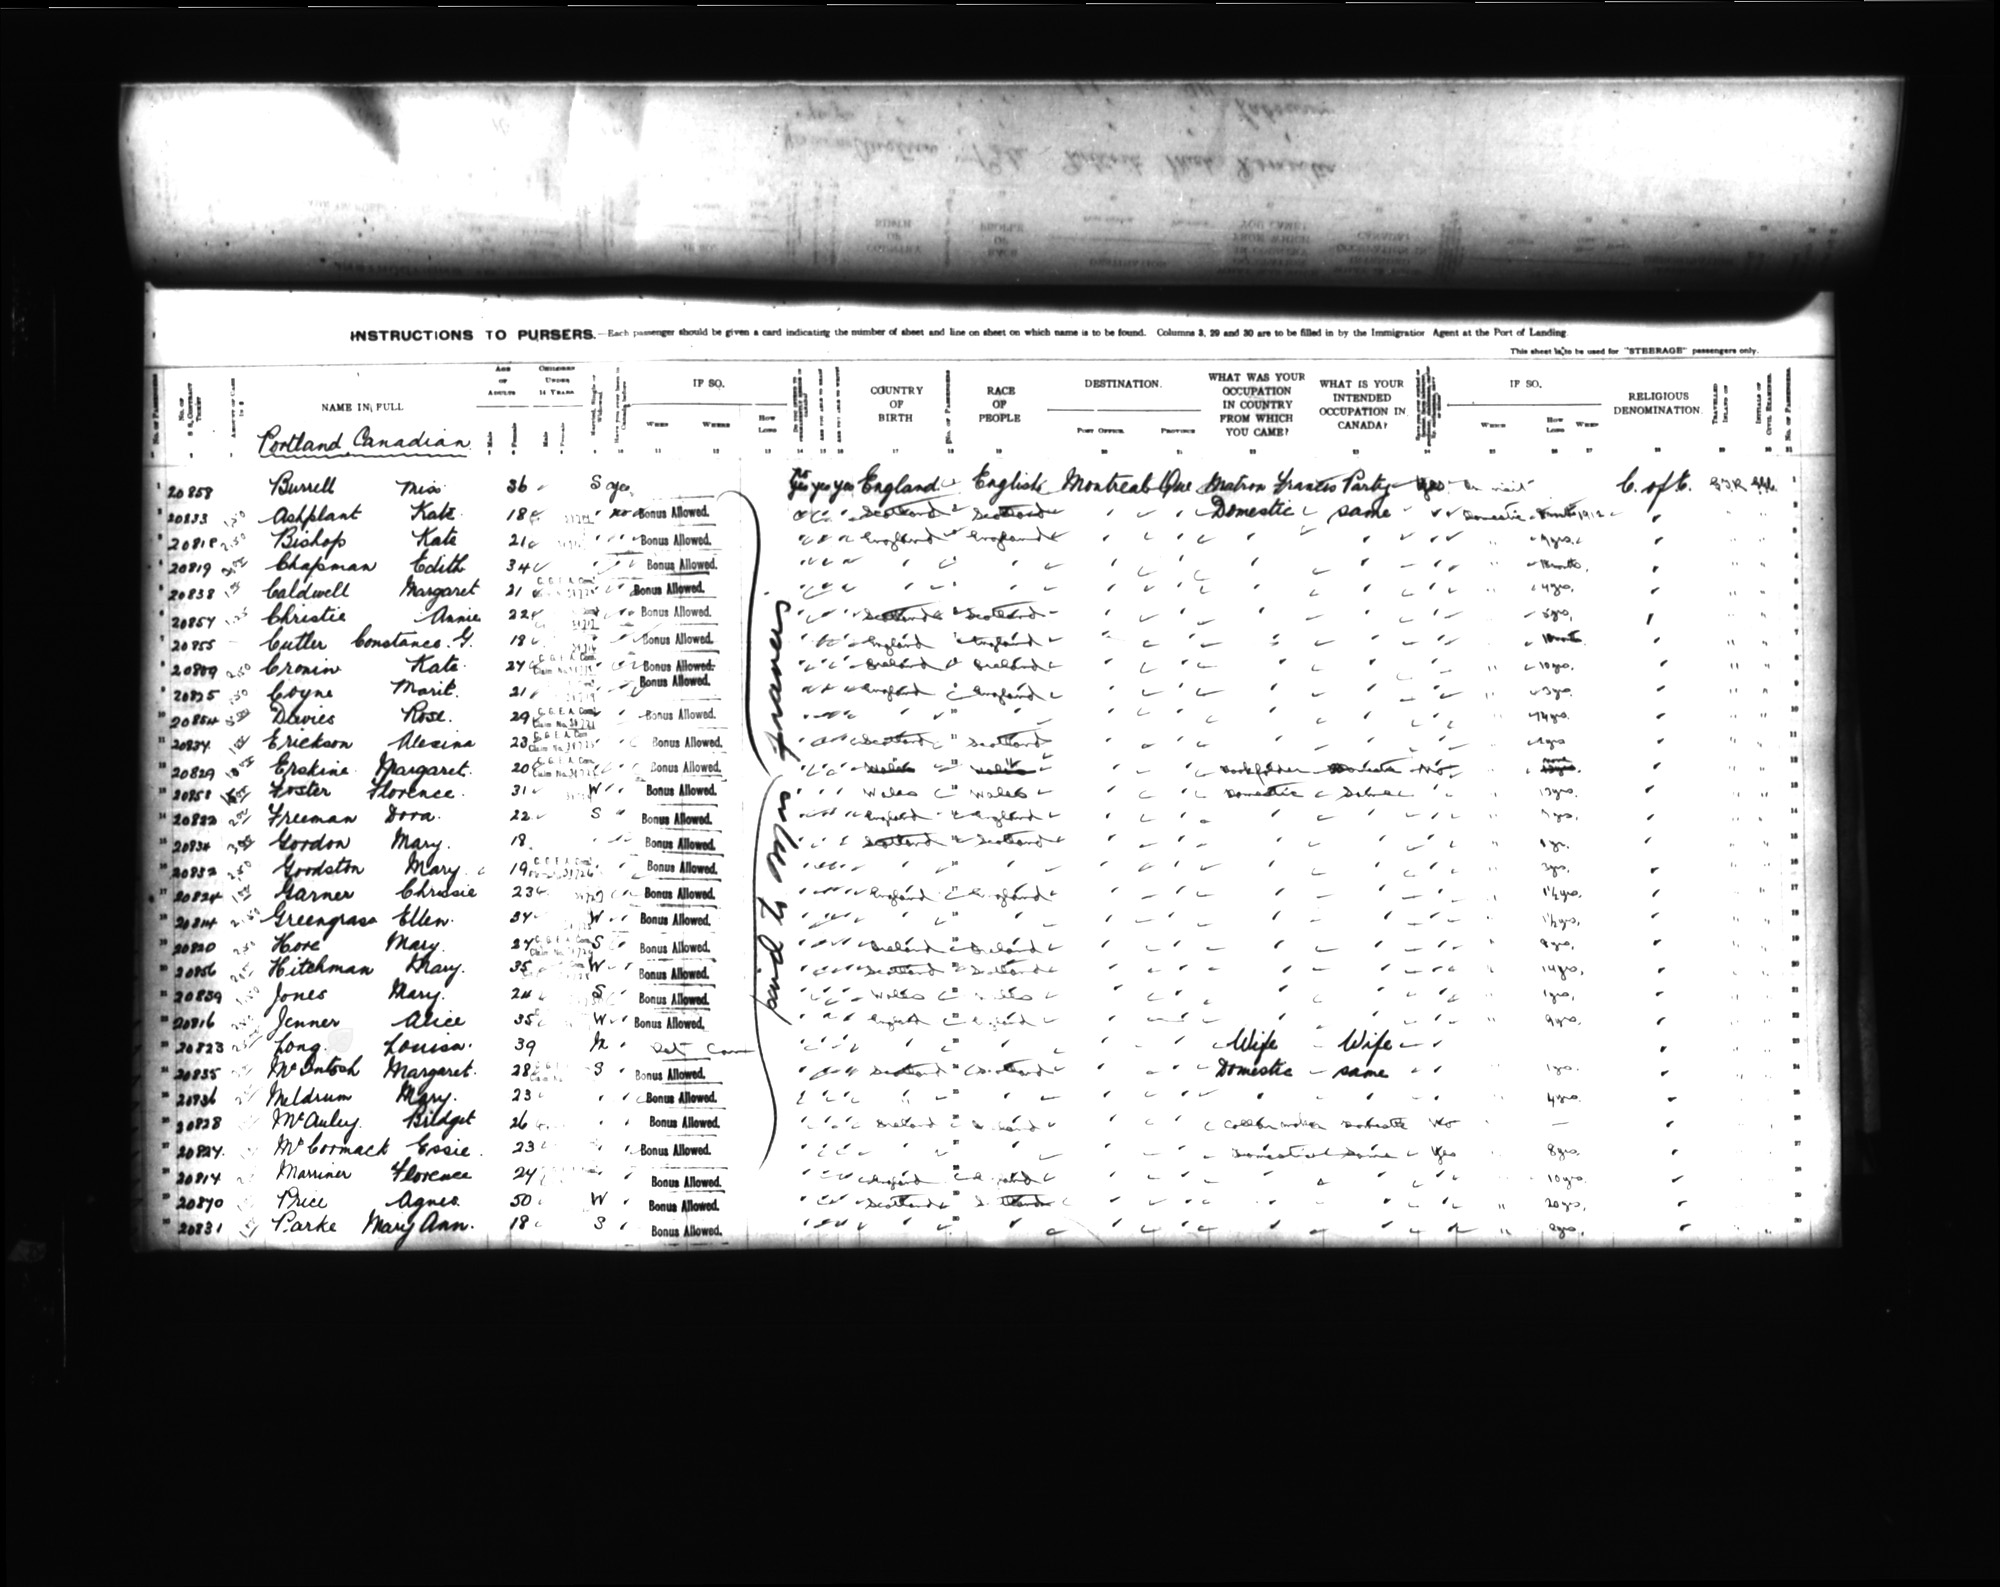 Digitized page of Passenger Lists for Image No.: CANIMM1913PLIST_0000406960-00590